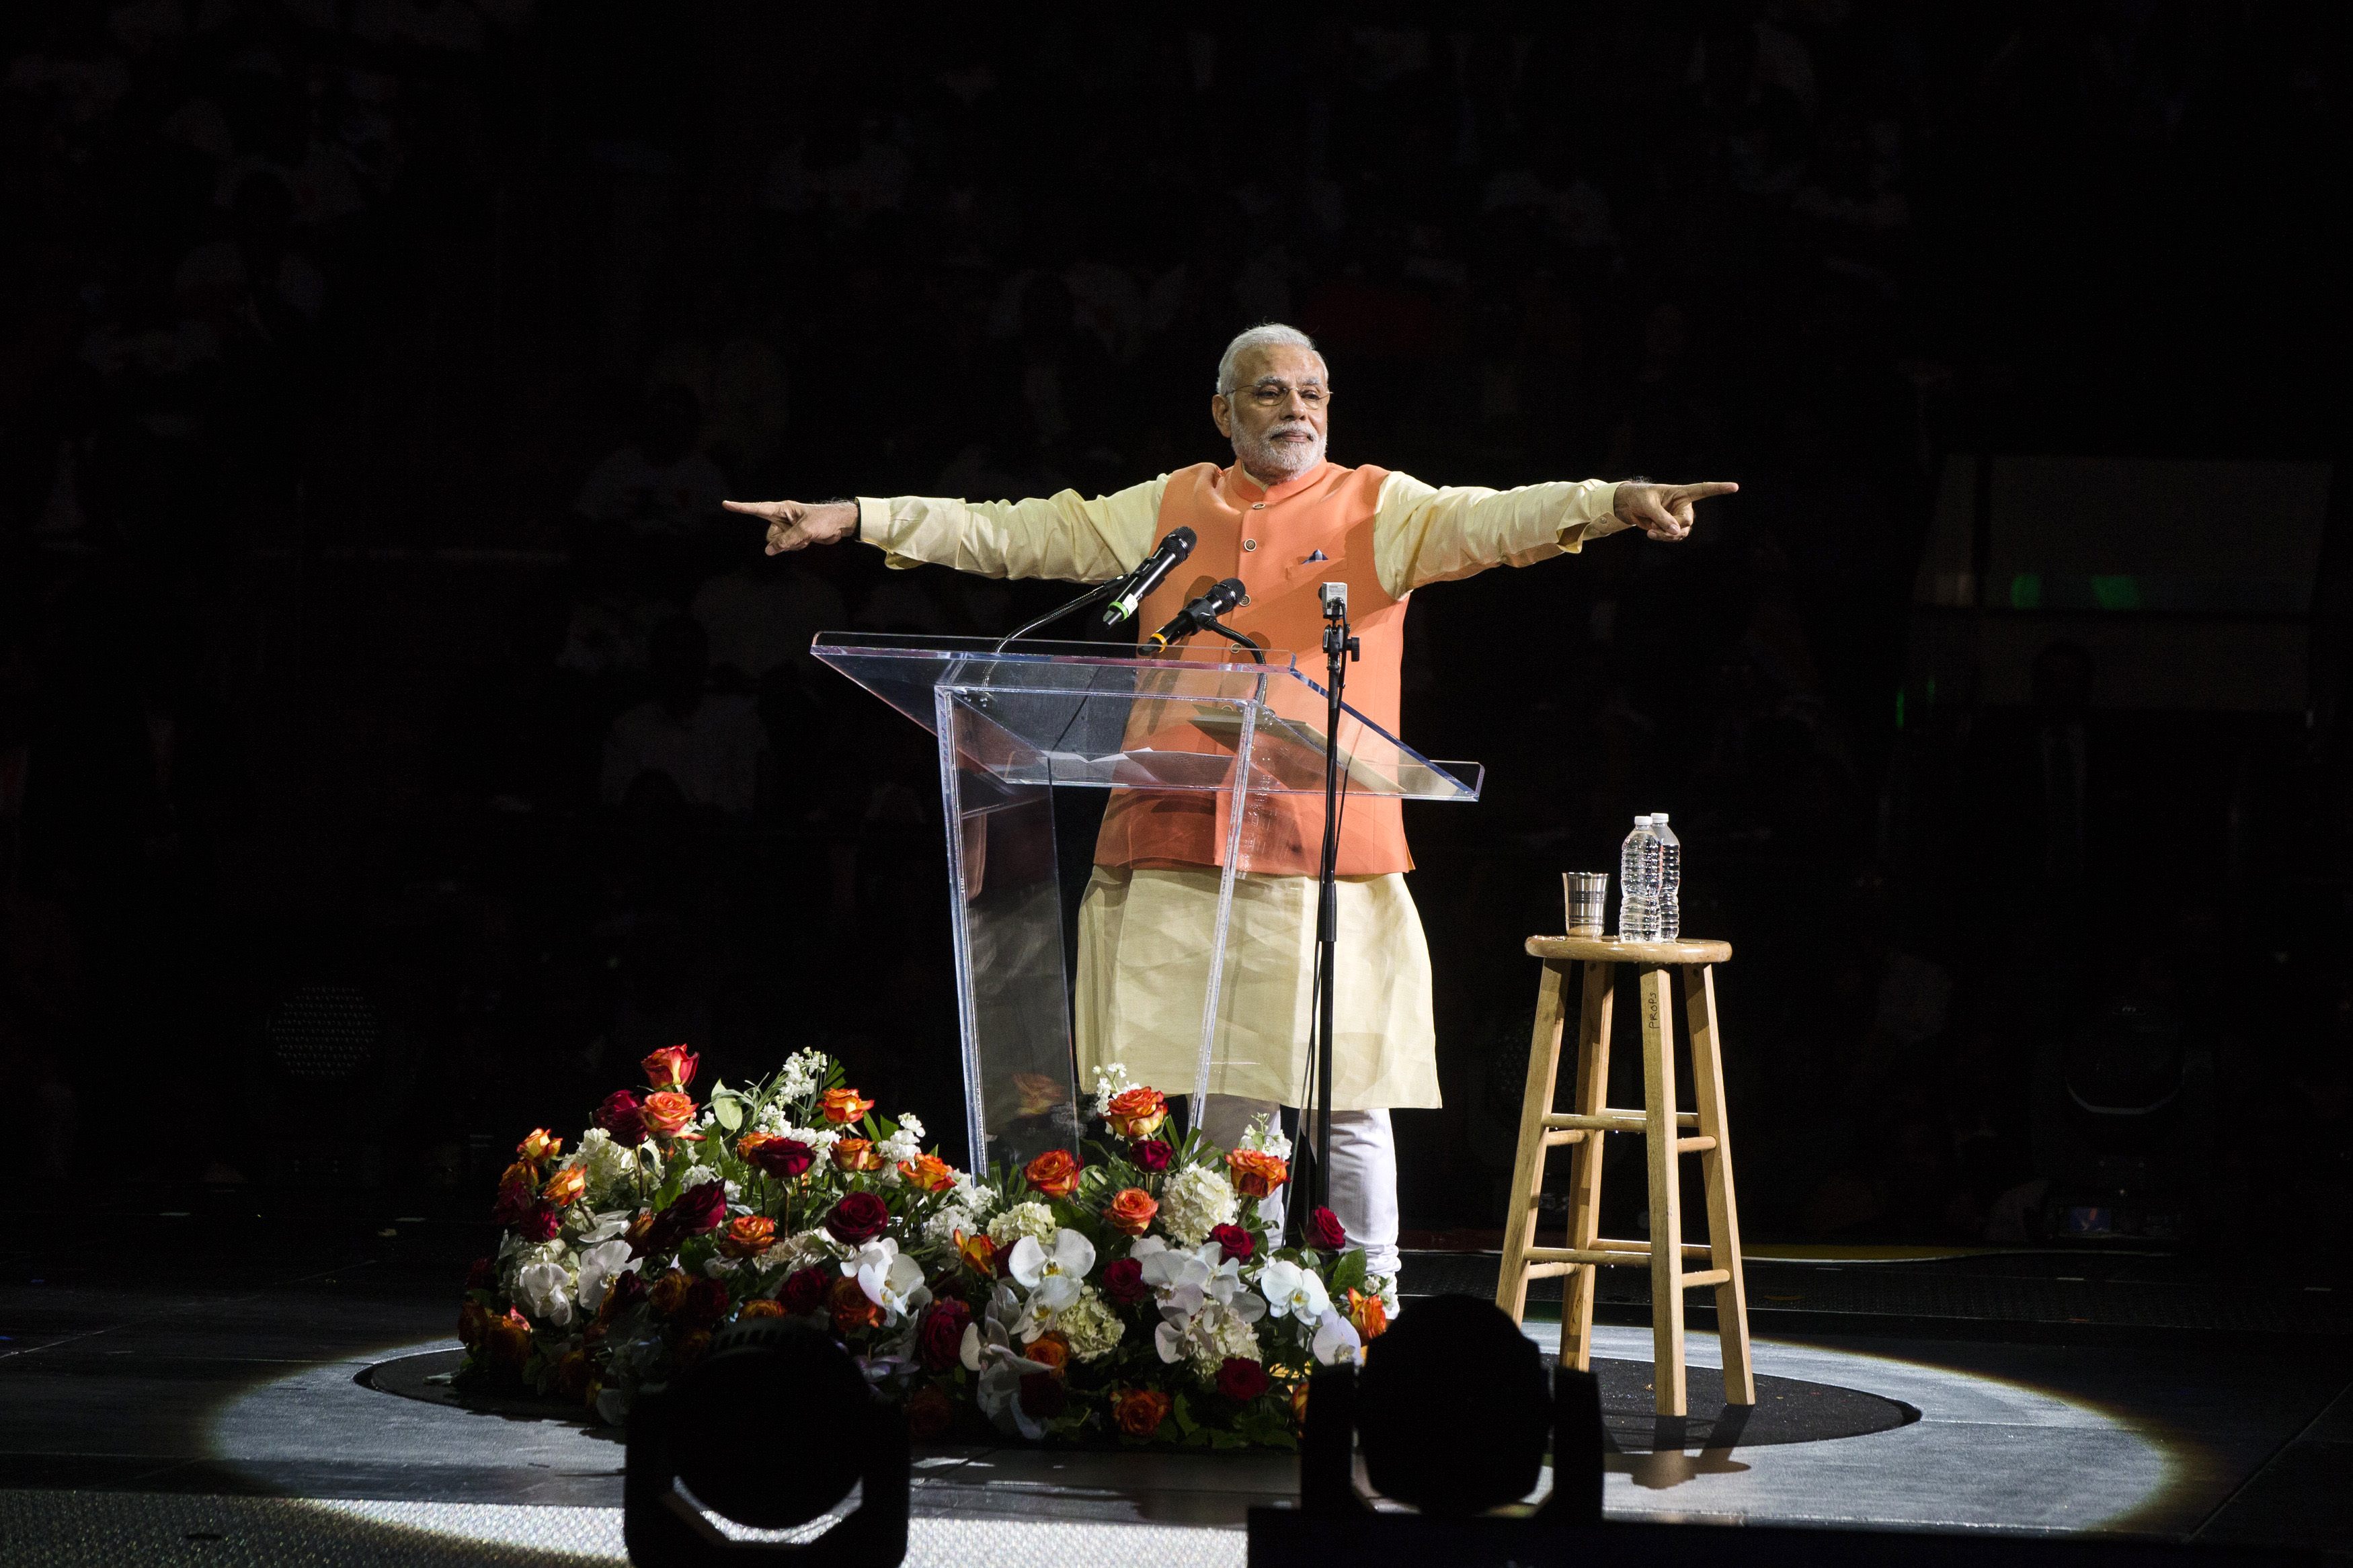 Prime Minister Narendra Modi was catapulted onto the national stage on the back of an enviable track record in Gujarat. Photo: Reuters